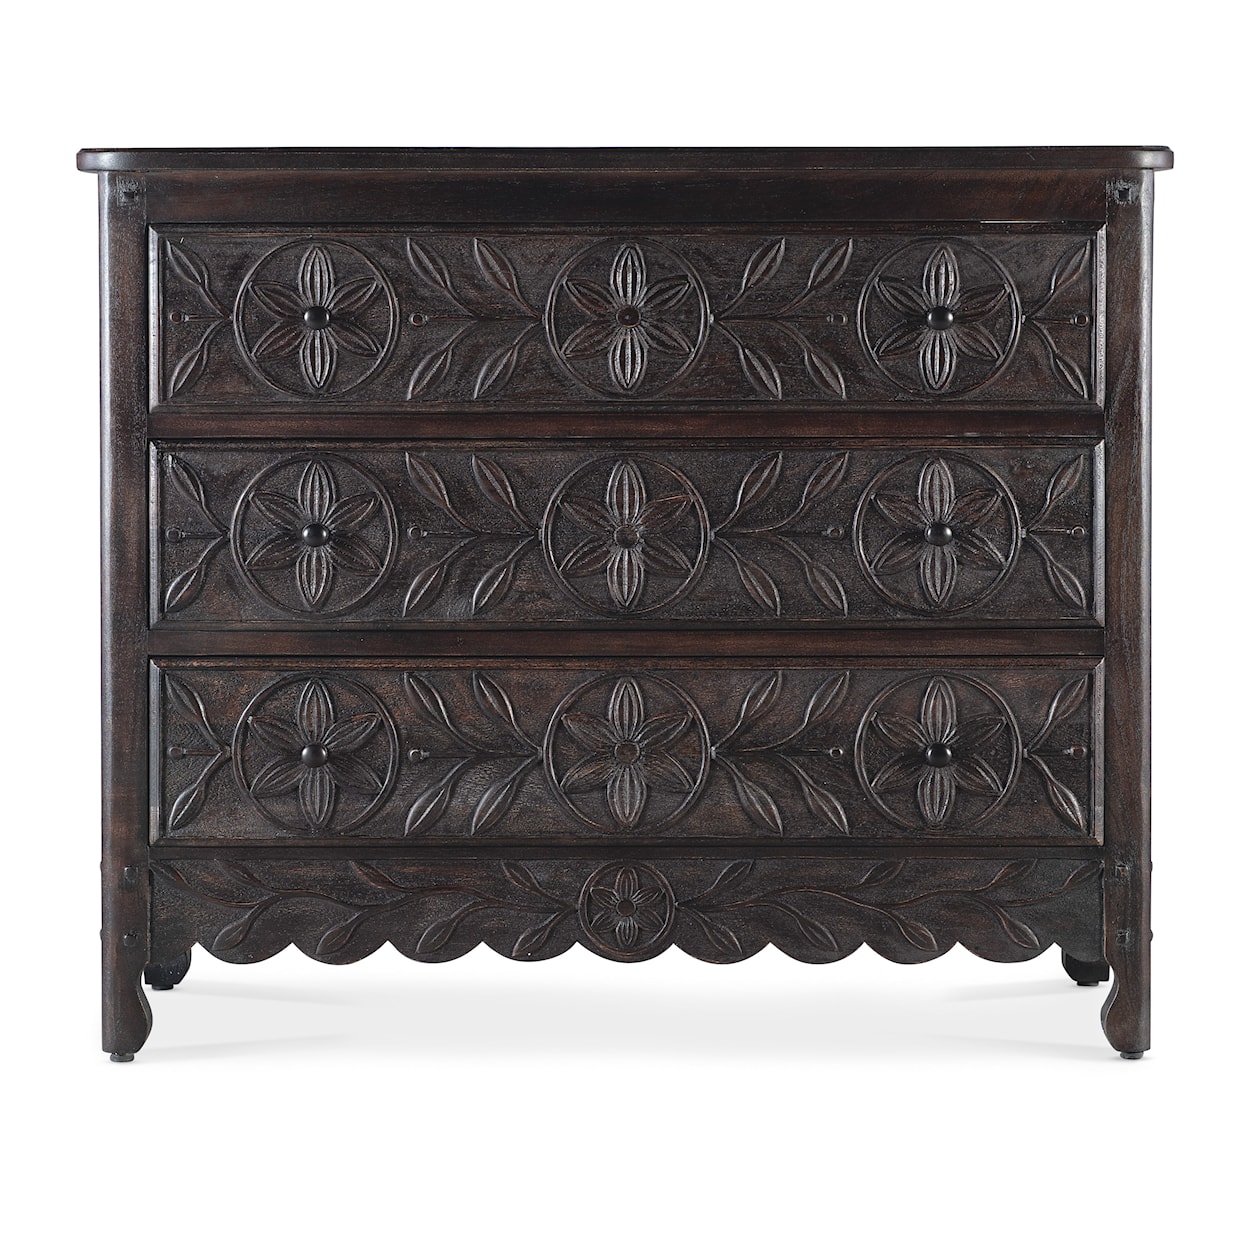 Hooker Furniture Commerce and Market 3-Drawer Chest